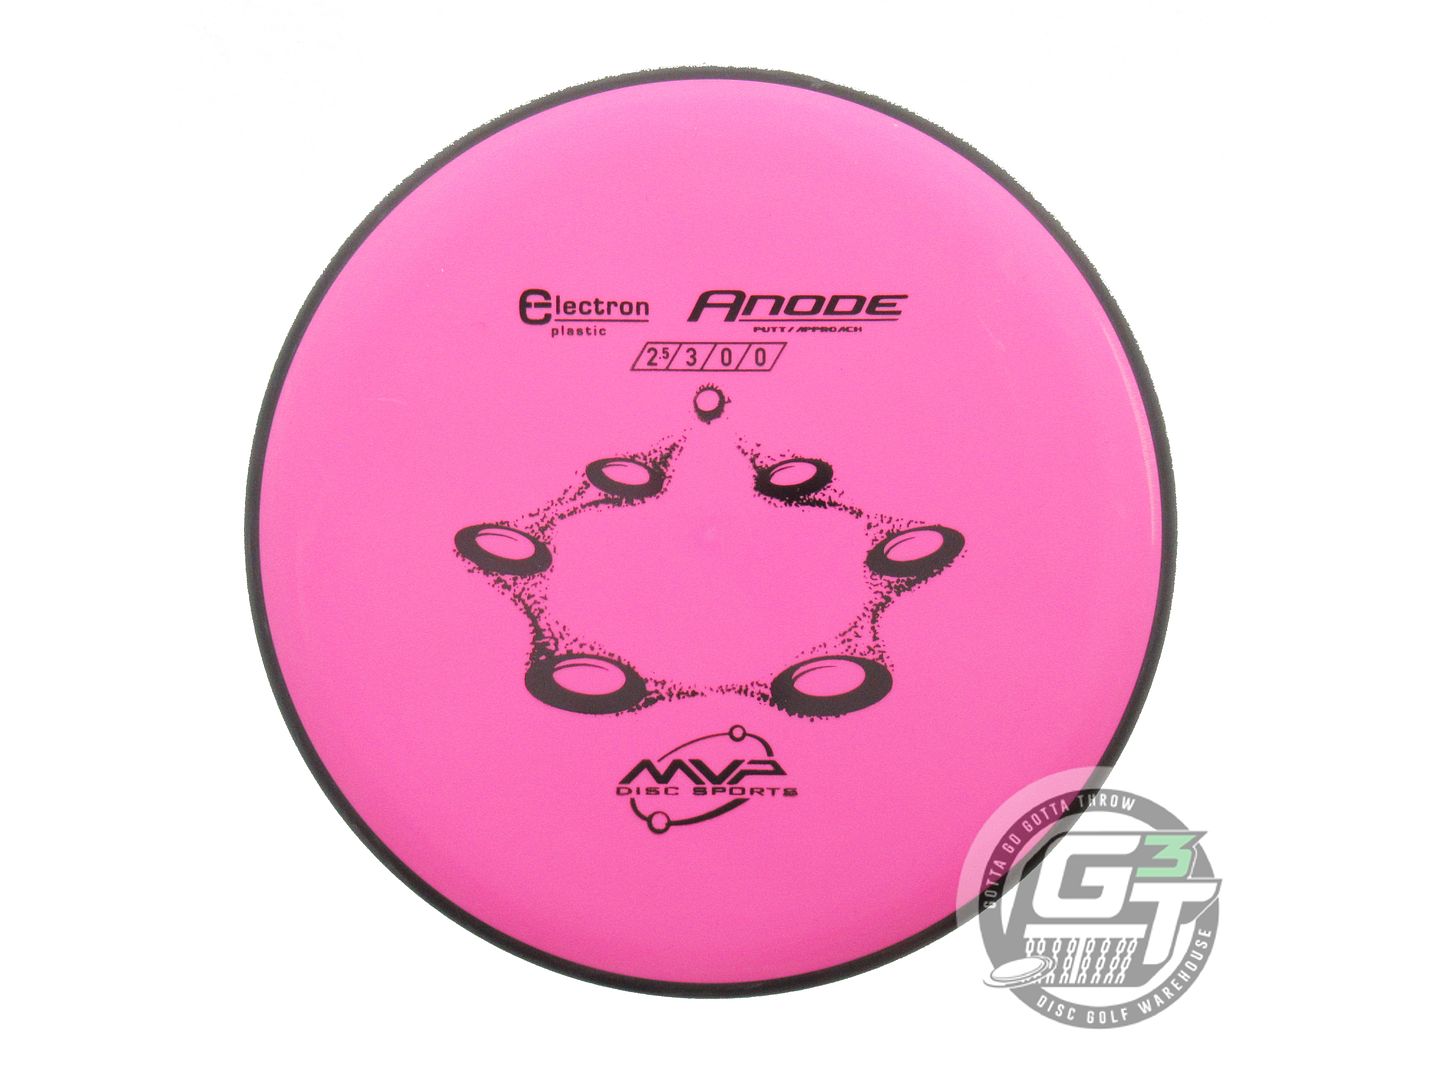 MVP Electron Anode Putter Golf Disc (Individually Listed)